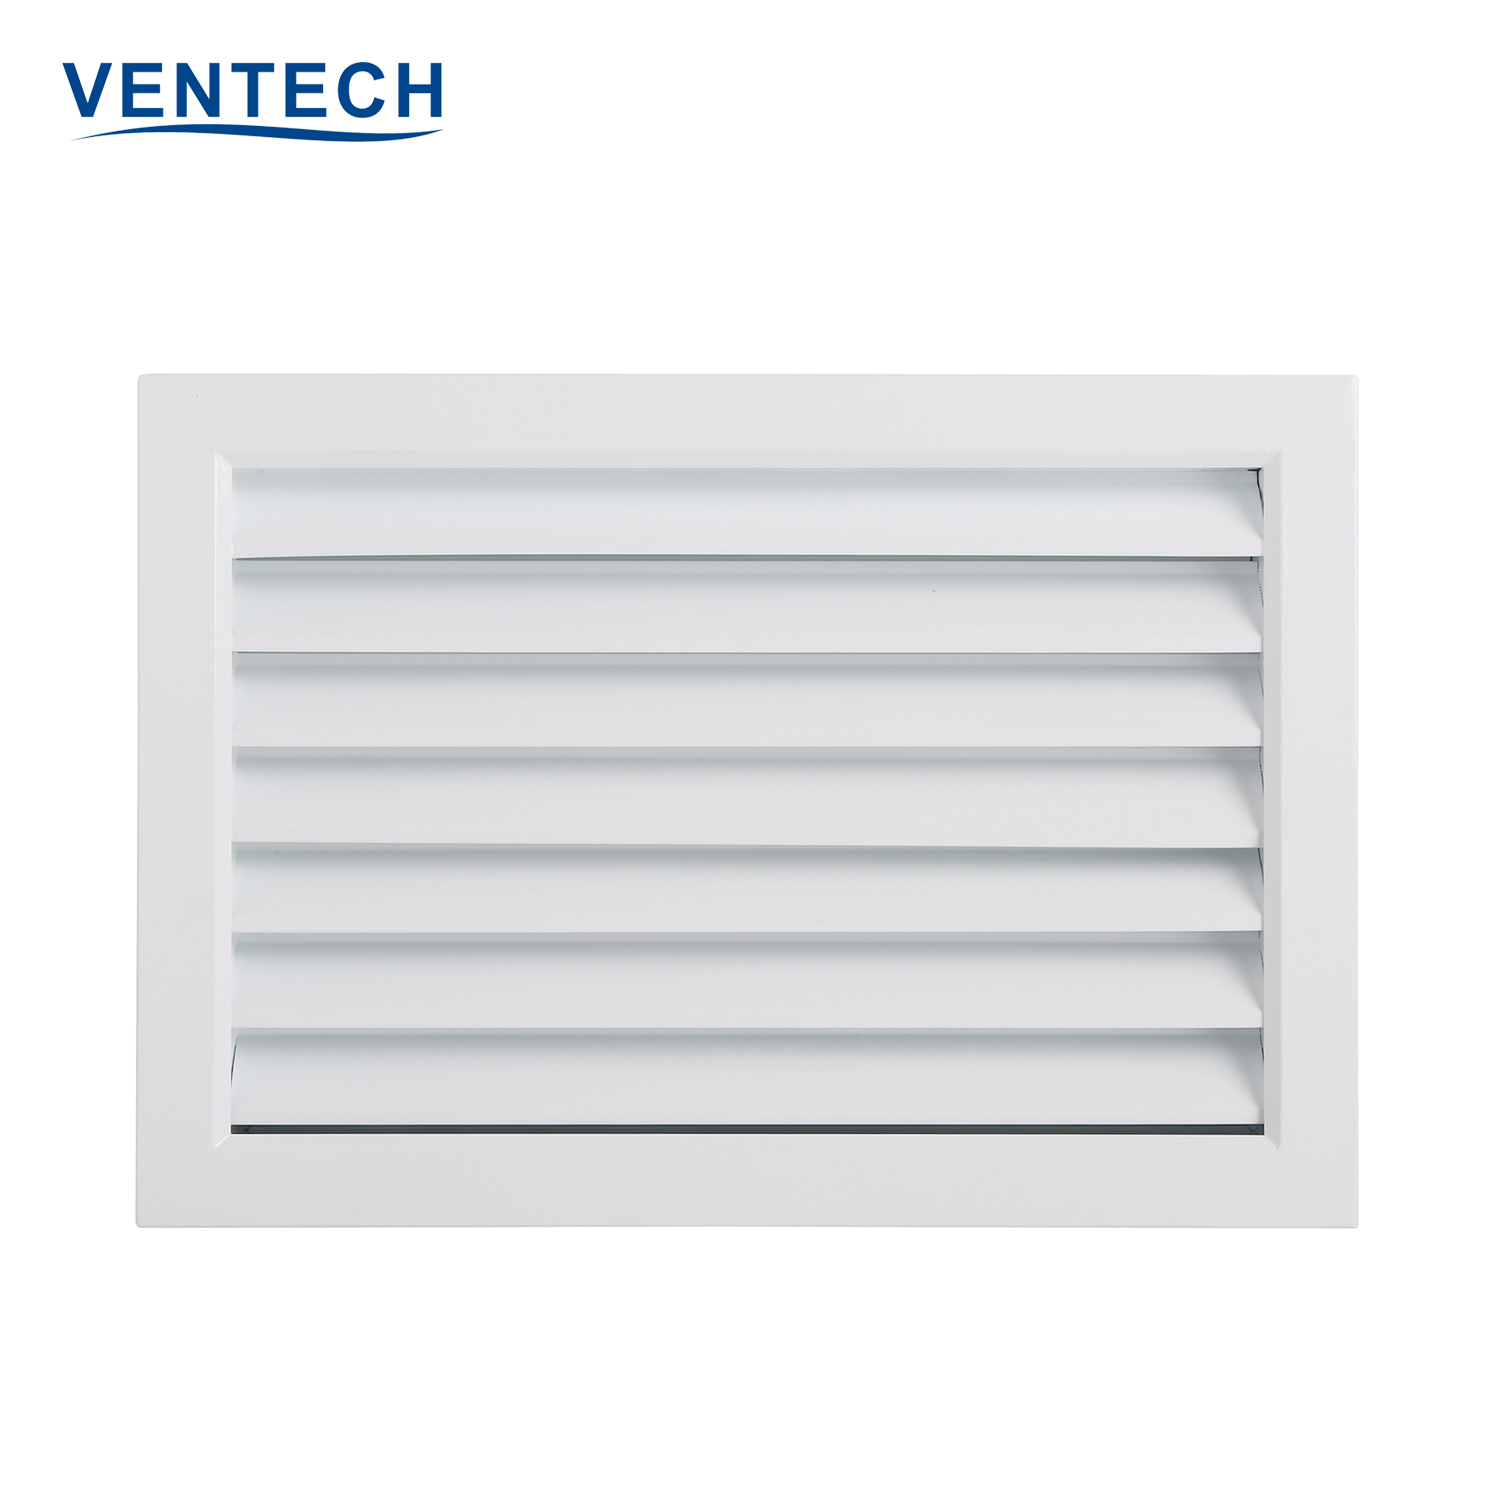 Ventech quality return air filter grille suppliers for air conditioning-2